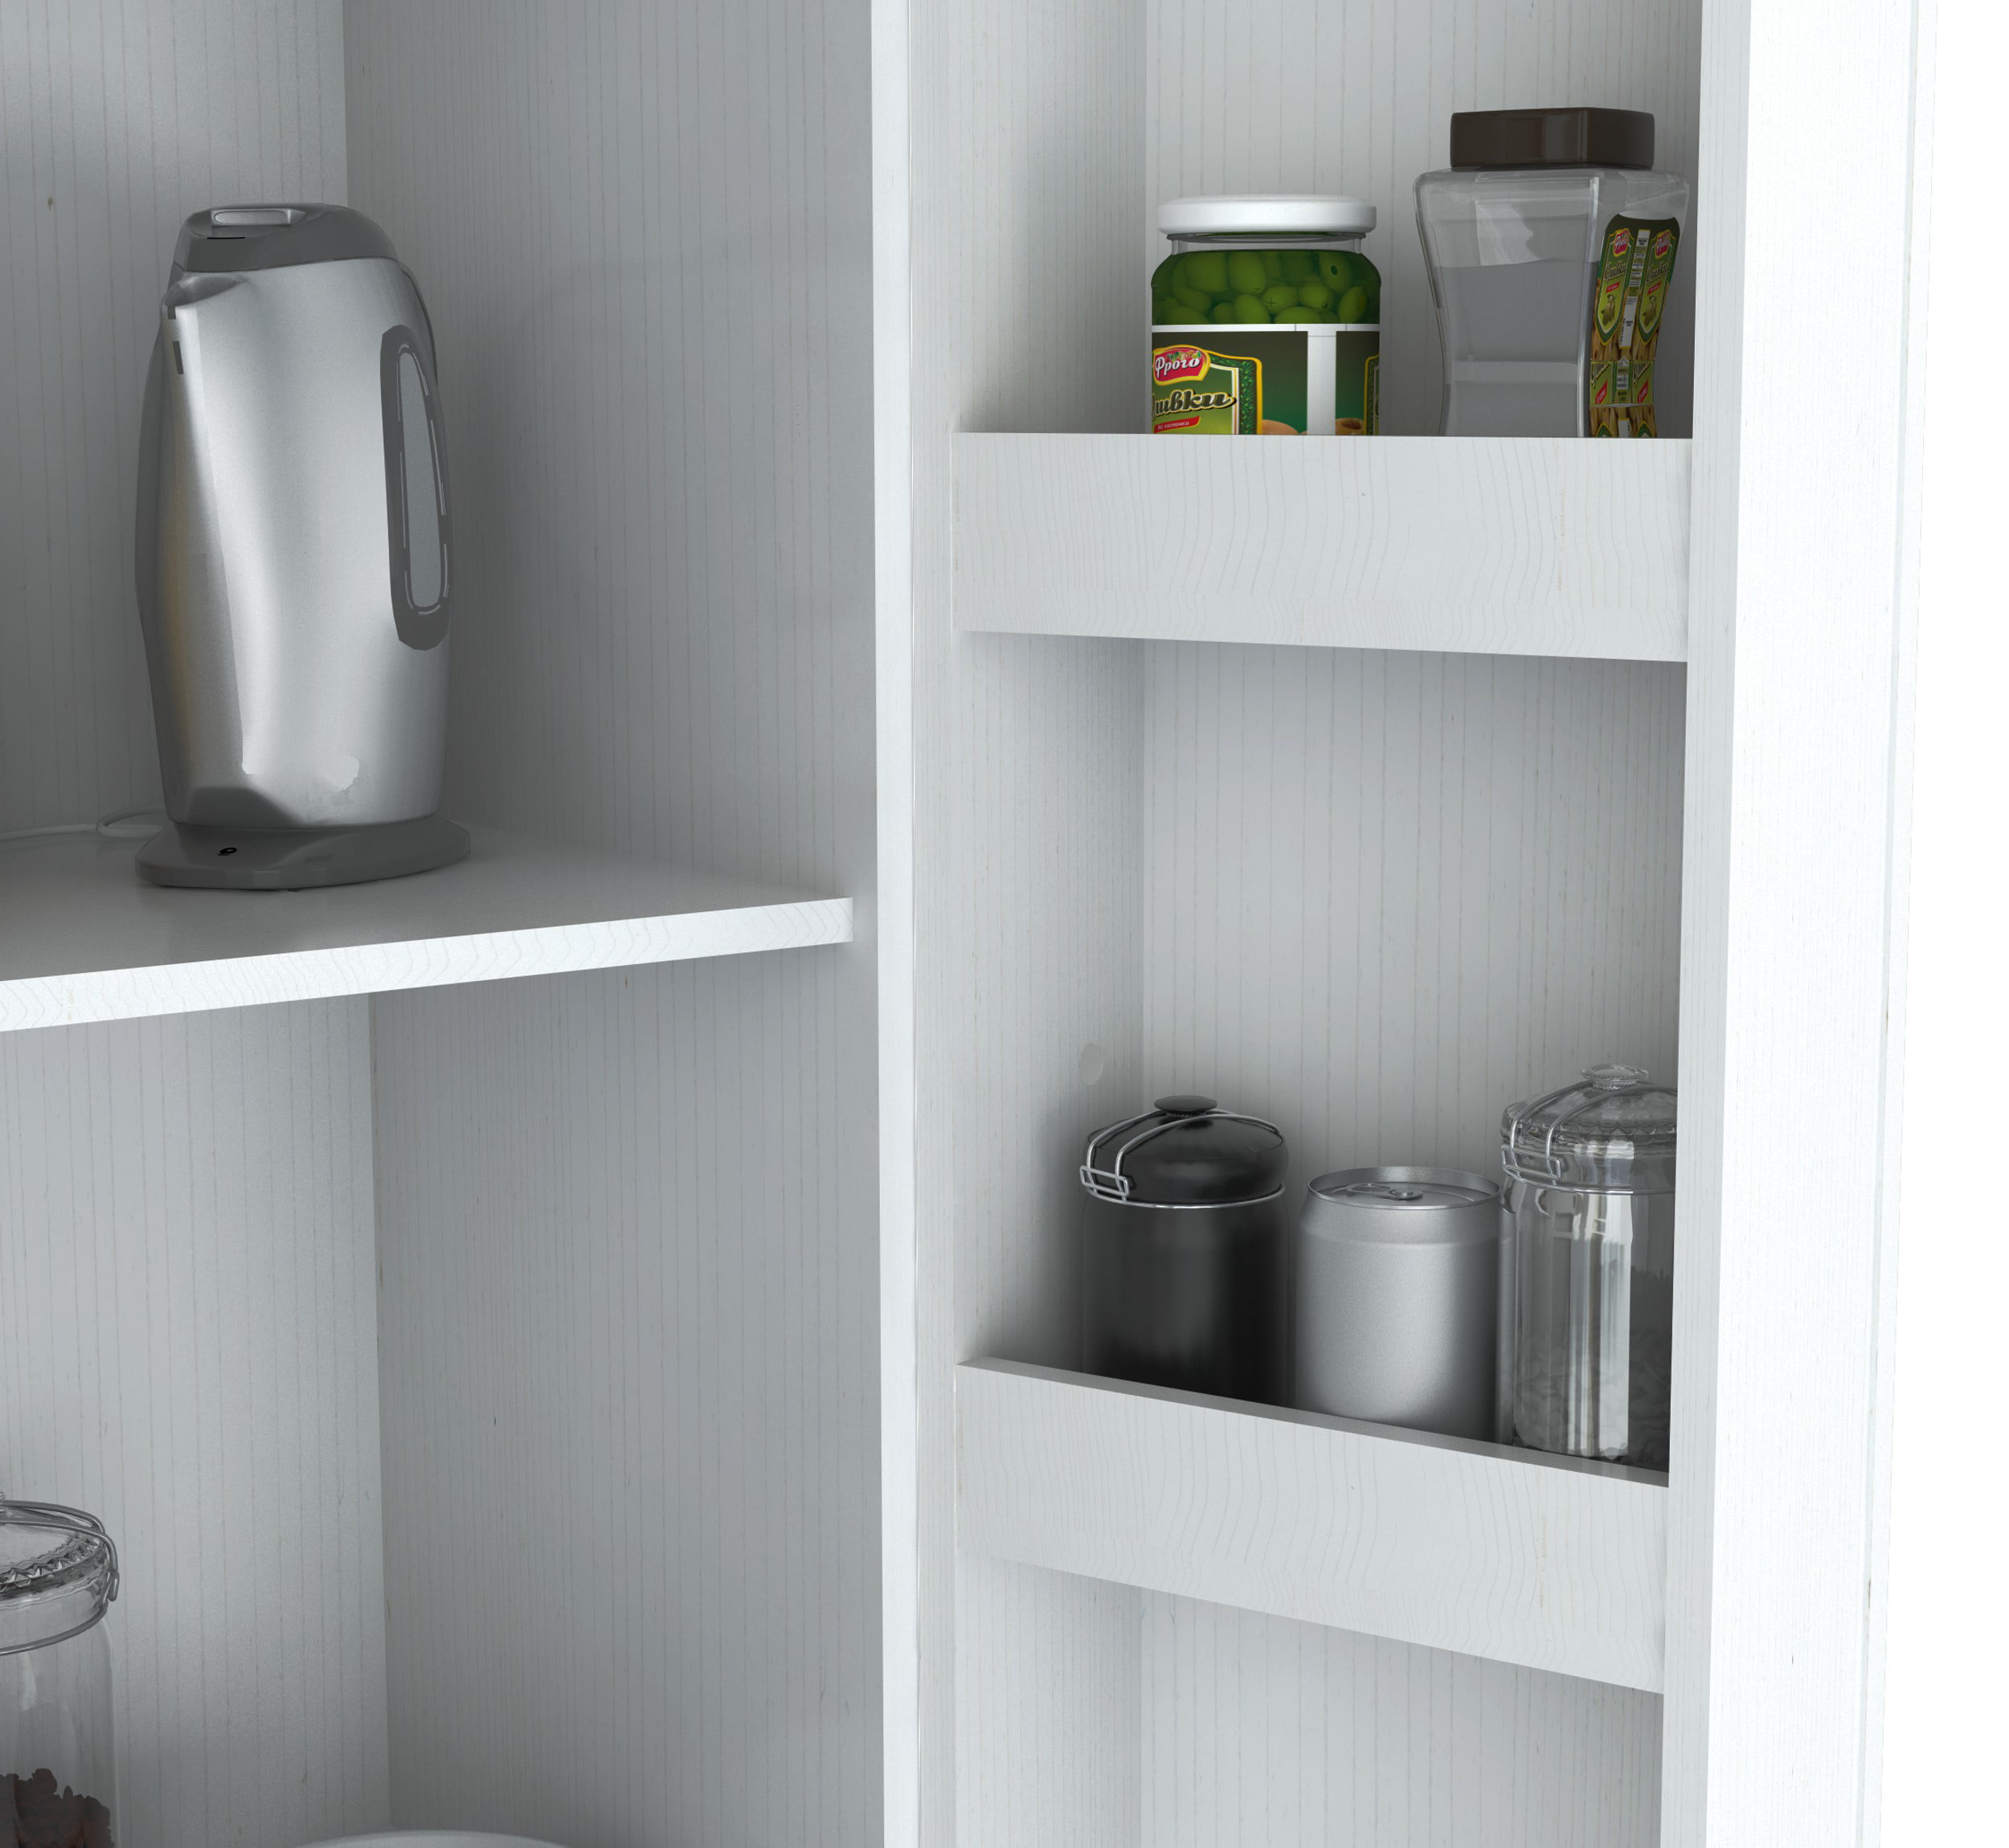 MF-442 Pantry Closet with Pull-out Shelves